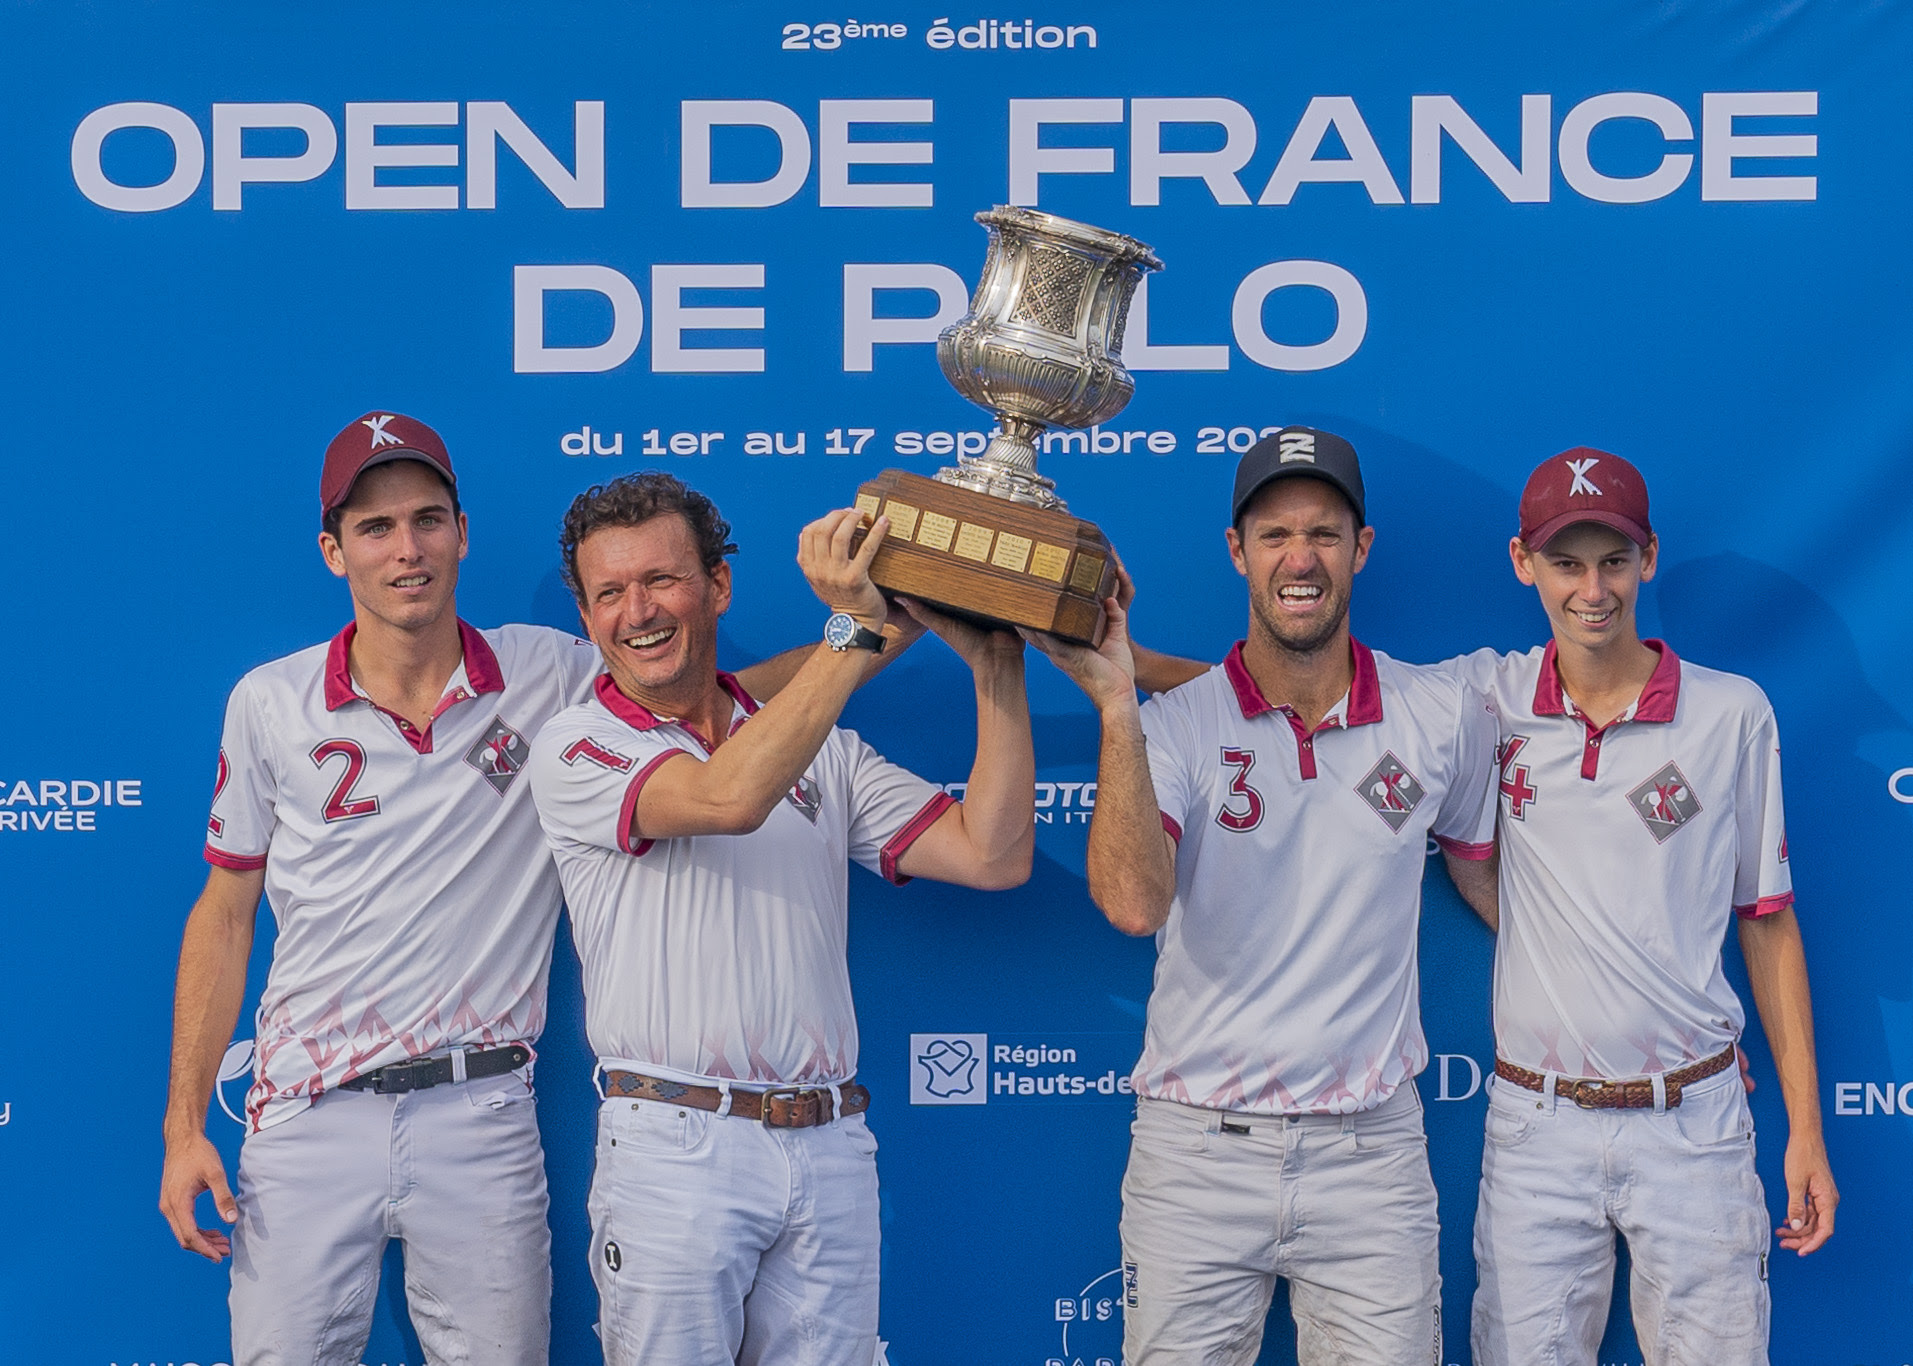 First victory in the Open de France for the Kazak team © Adele Renauldon RB Presse